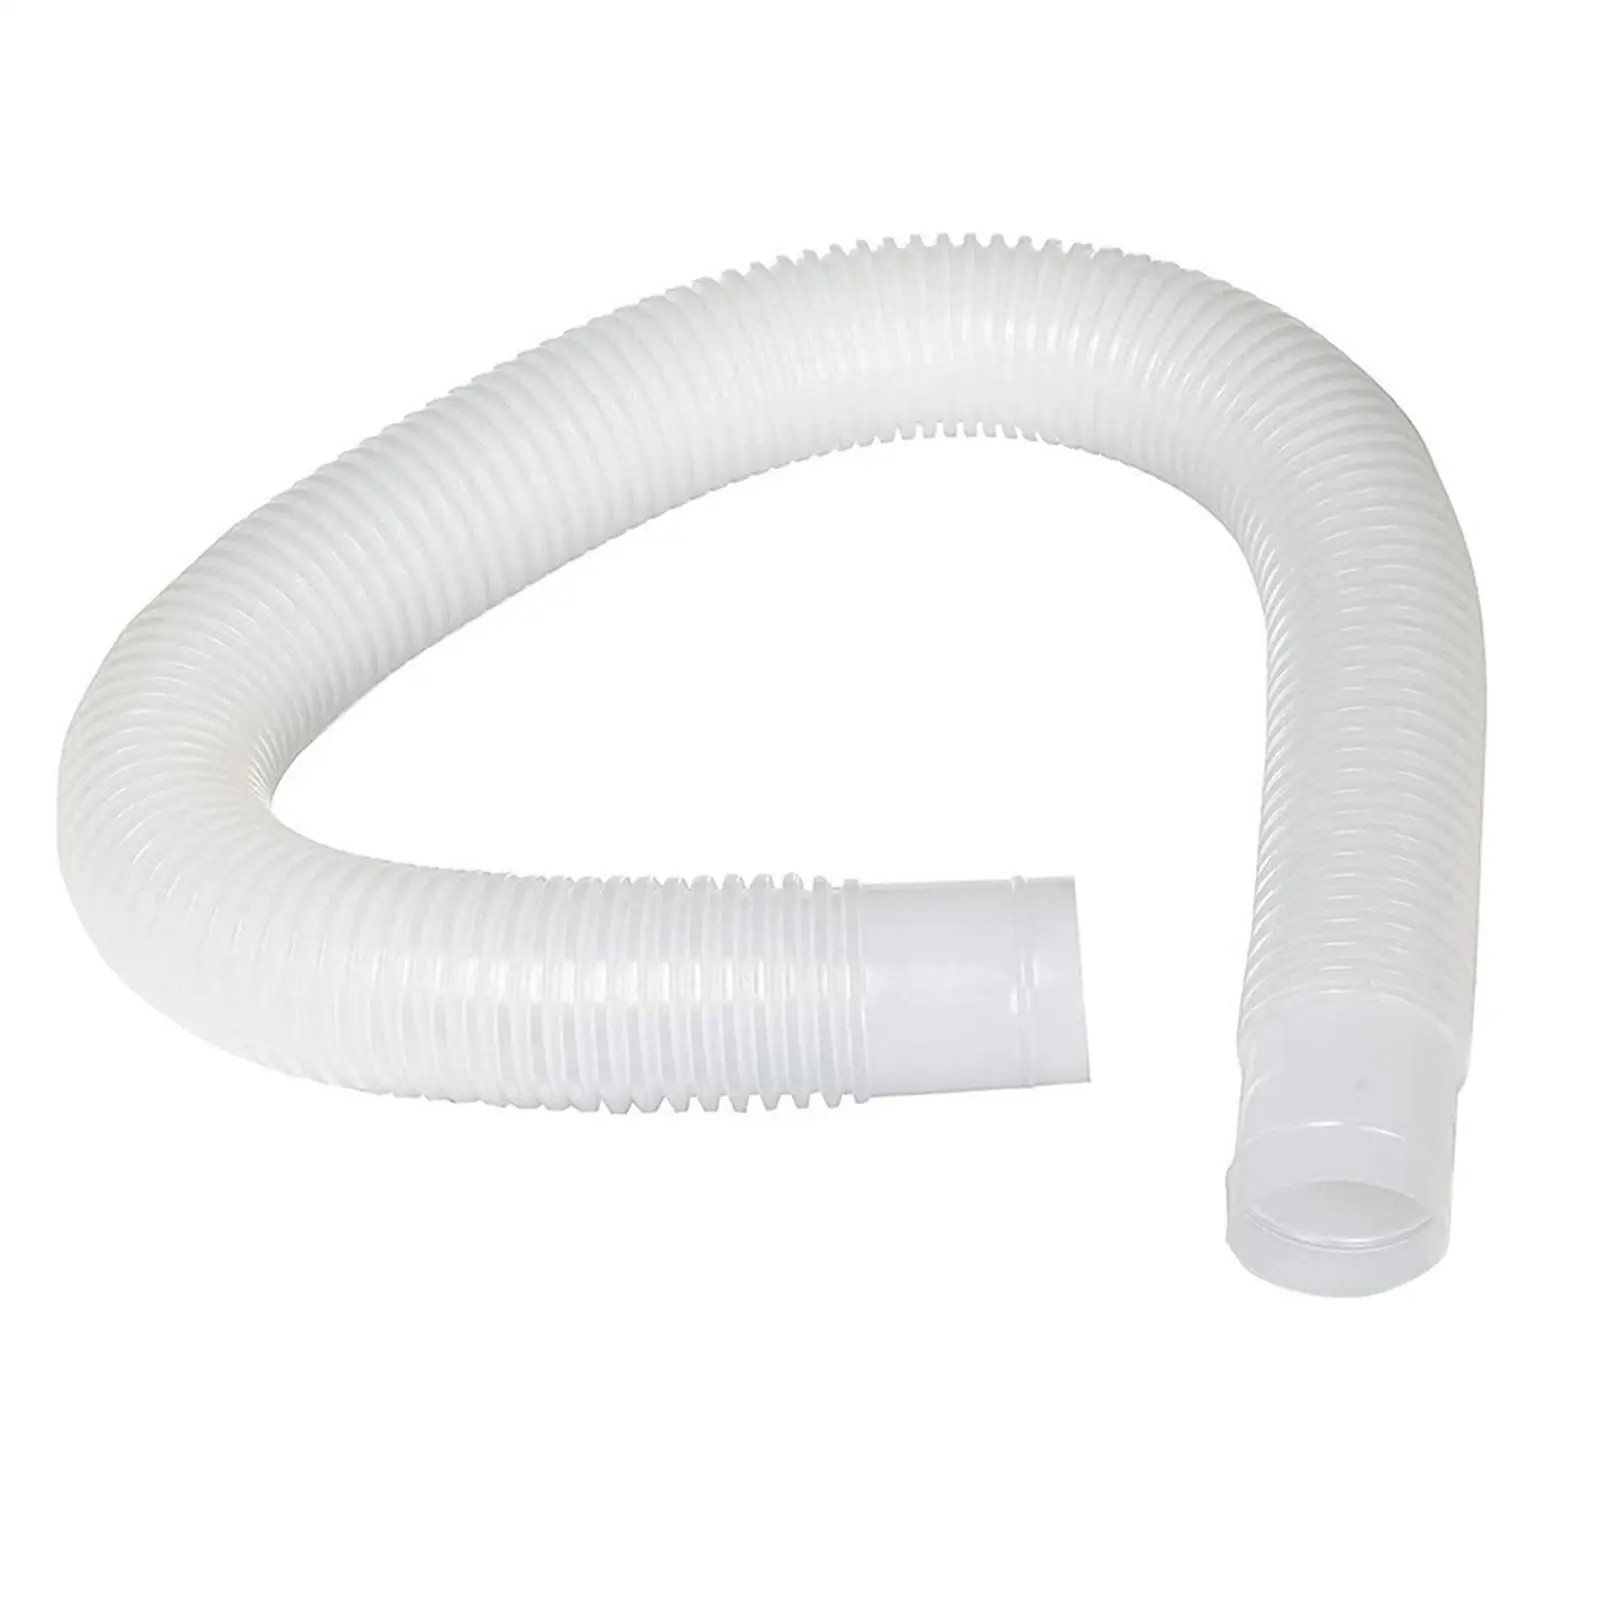 Pools Skimmer Hose Flexible Parts Heavy Duty Strainer Replacement Hose Pool Filter Connection Hose Pool Vacuum Pump Skimmer Hose